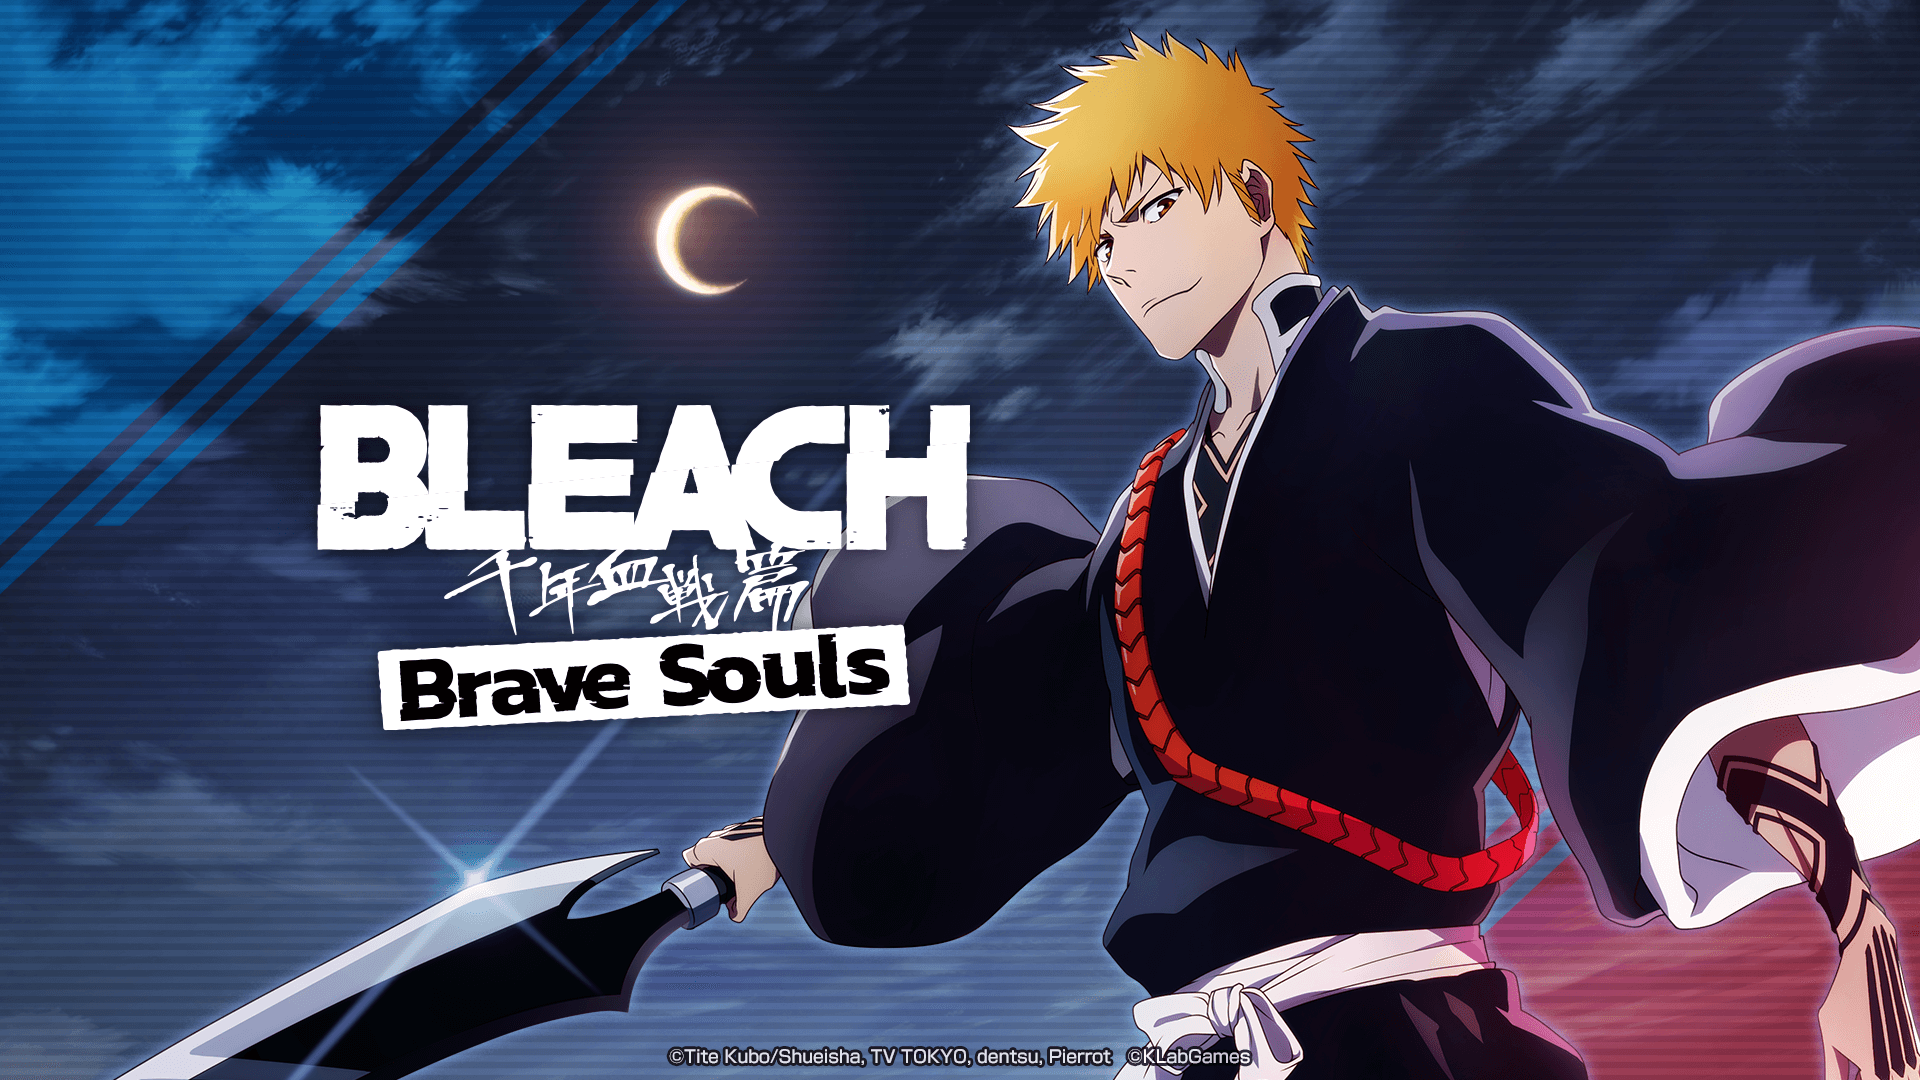 Bleach: Thousand-Year Blood War Anime Sees Red in New Key Visual